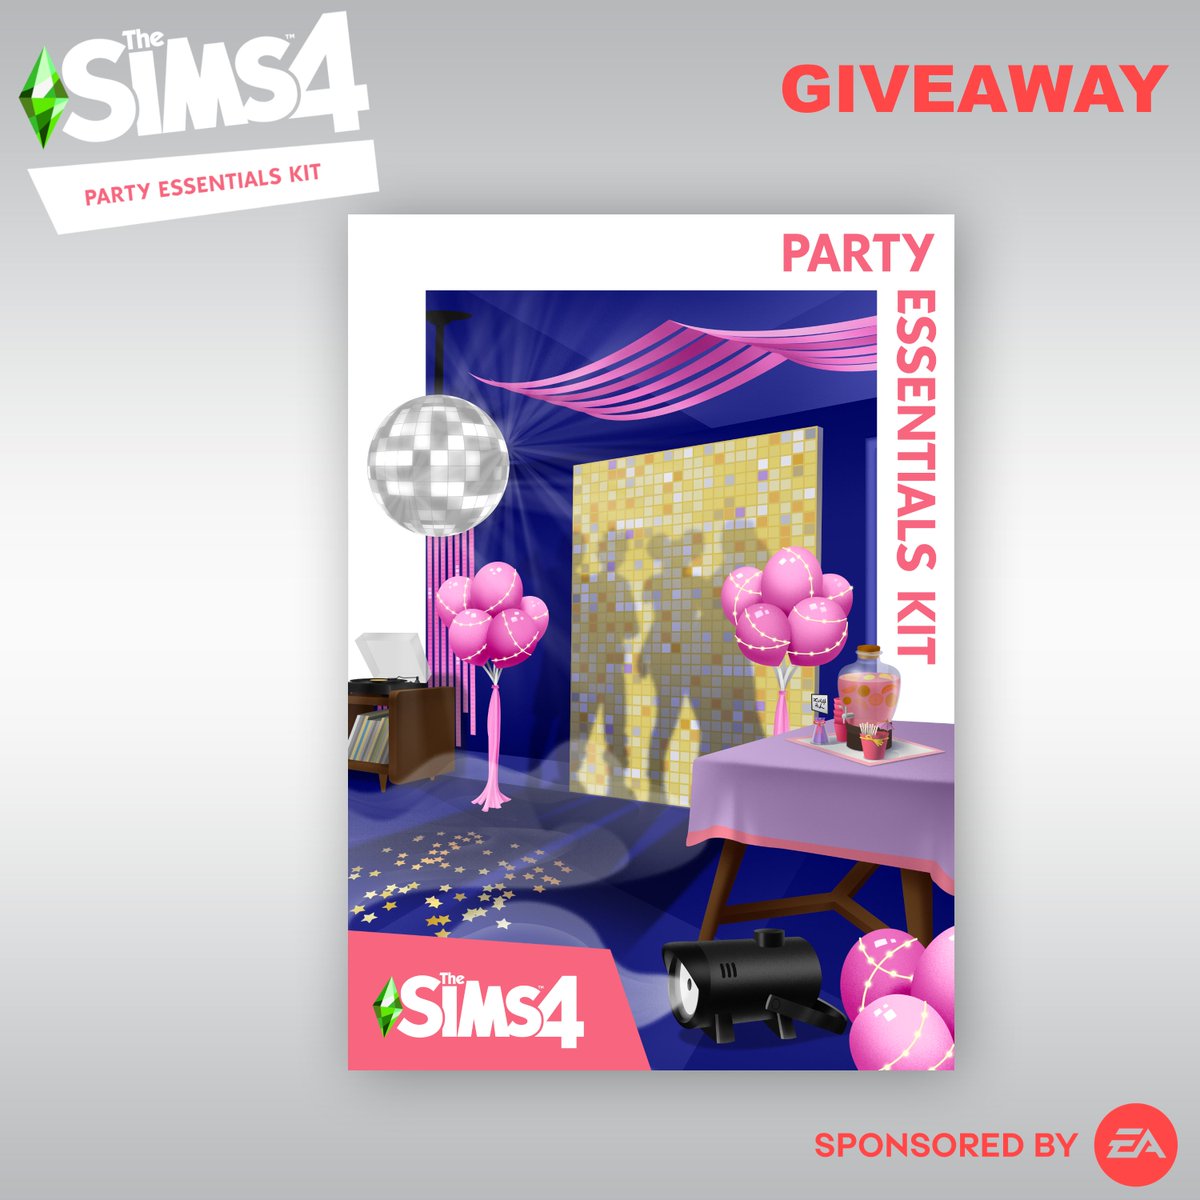 GIVEAWAY TIME😎

Thank you to the #EACreatorNetwork 
for the possibility giving away a 
Code for the Party Essentials Kit 

 #EAPartner #ad #SponsoredbyEA

How to Enter⭐

🌟Follow me
🌟Like and Repost
🌟Subsribe to my Youtube Channel ( fabflubs)

Giveaway ends April 19th